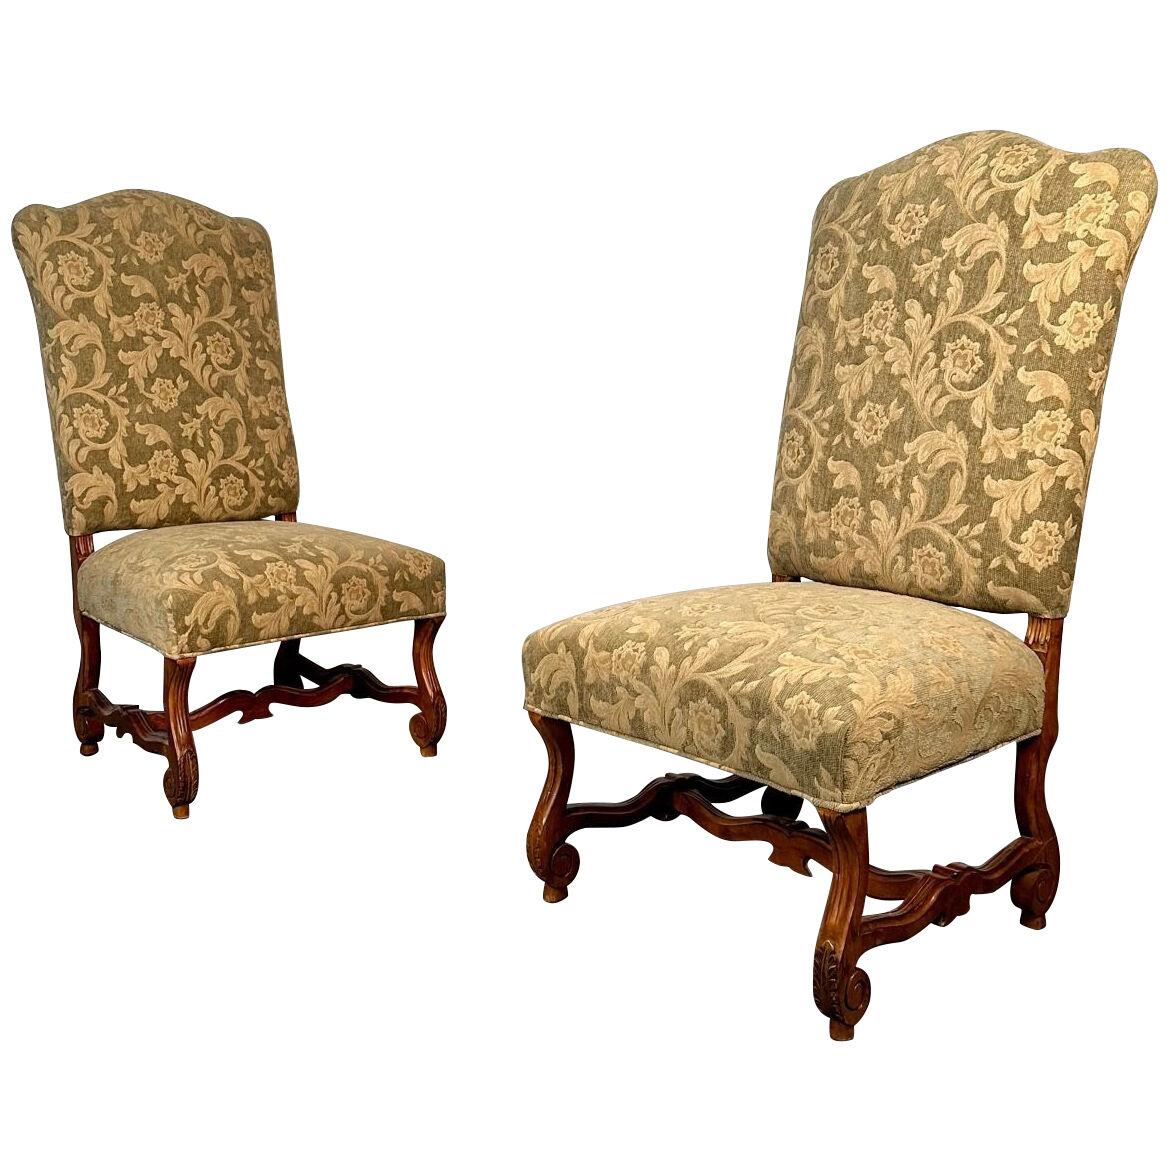 Pair of Jacobean Throne Chairs, King and Queen, Fine Fabric